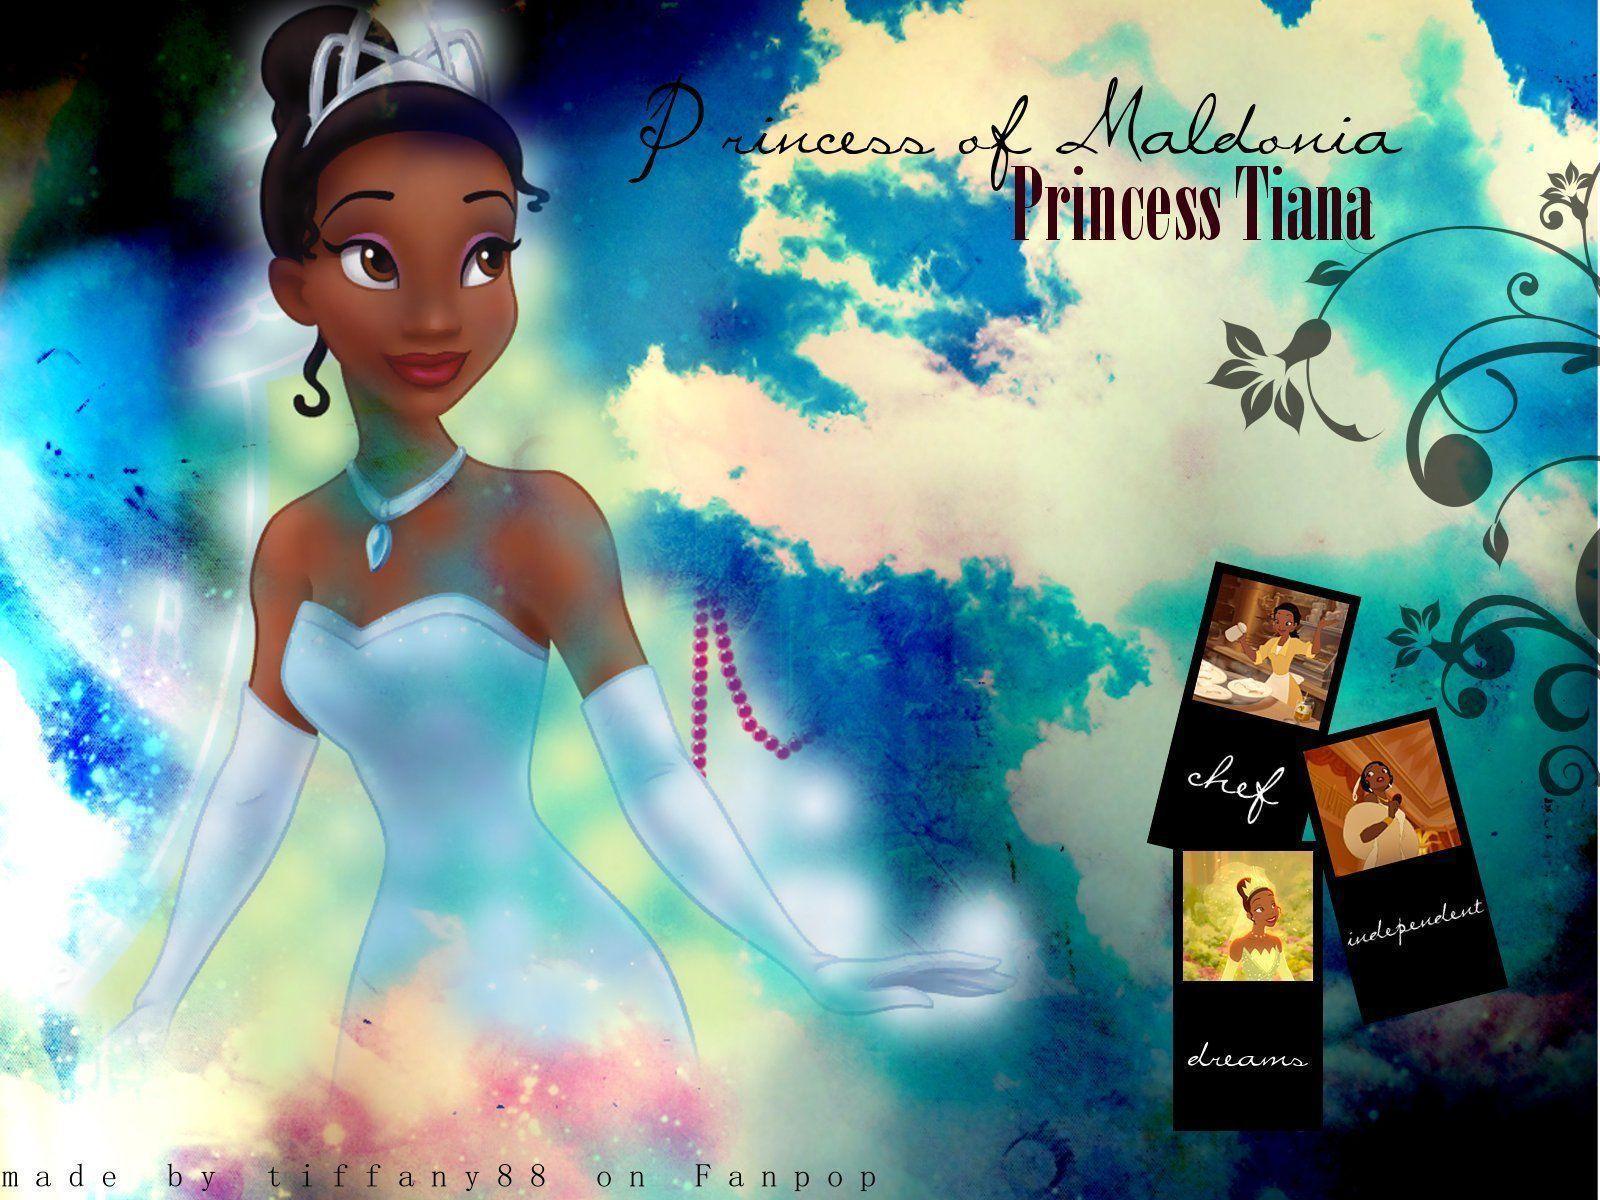 The Princess and the Frog HD Wallpaper Image for Android